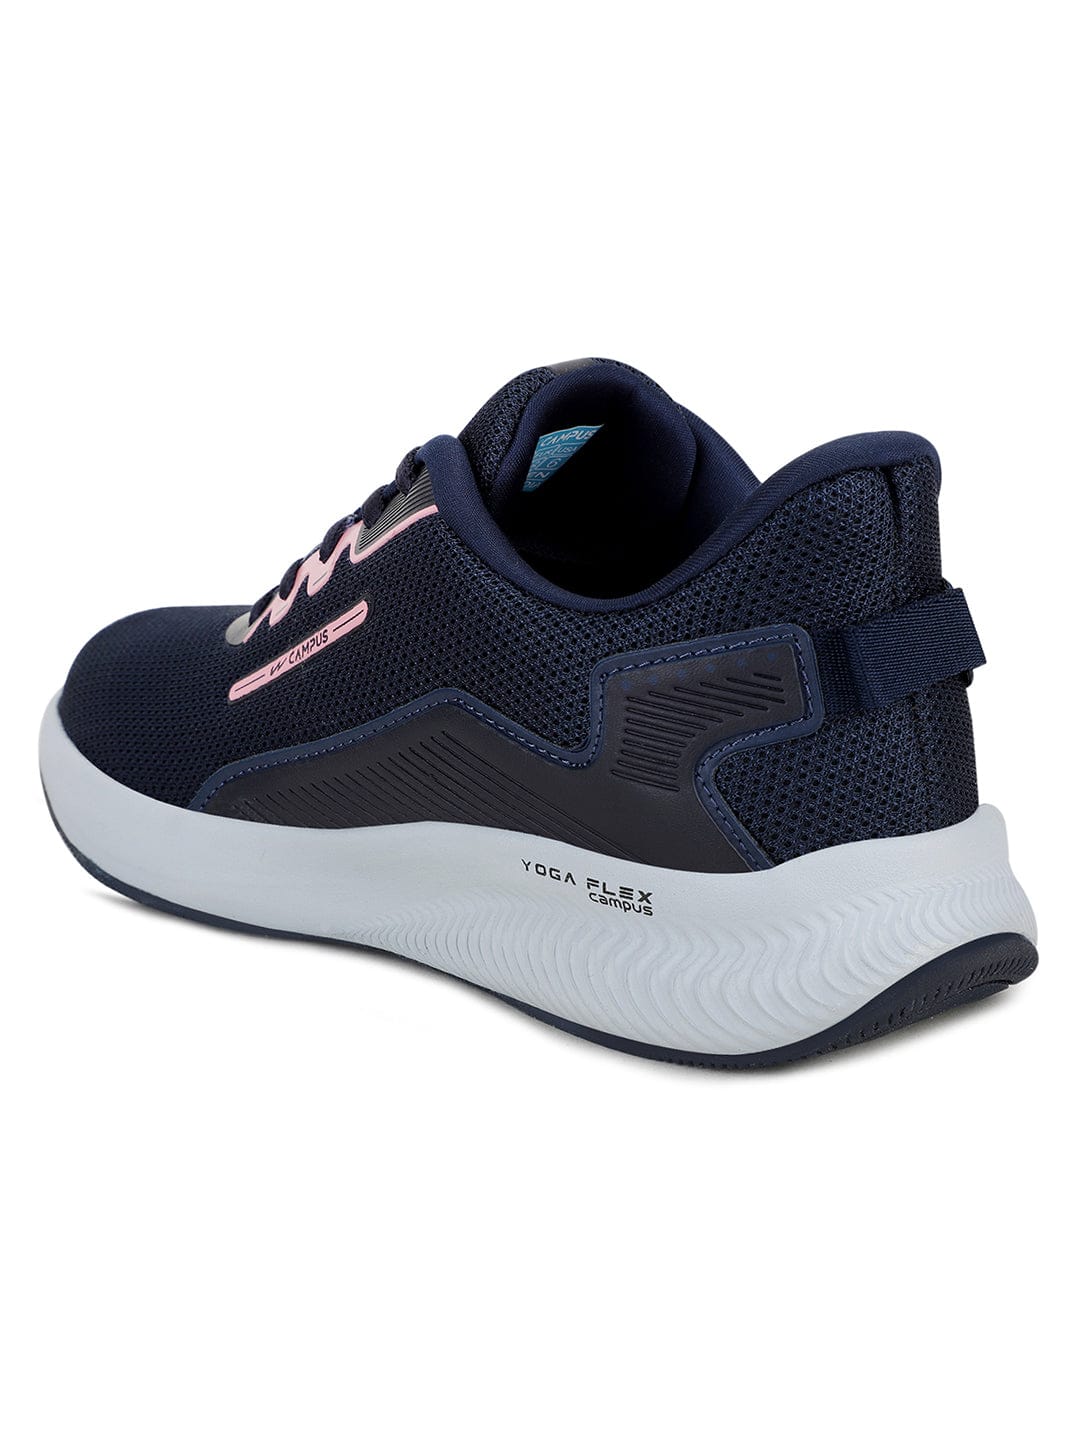 Buy BUBBLES Navy Women's Running Shoes online | Campus Shoes